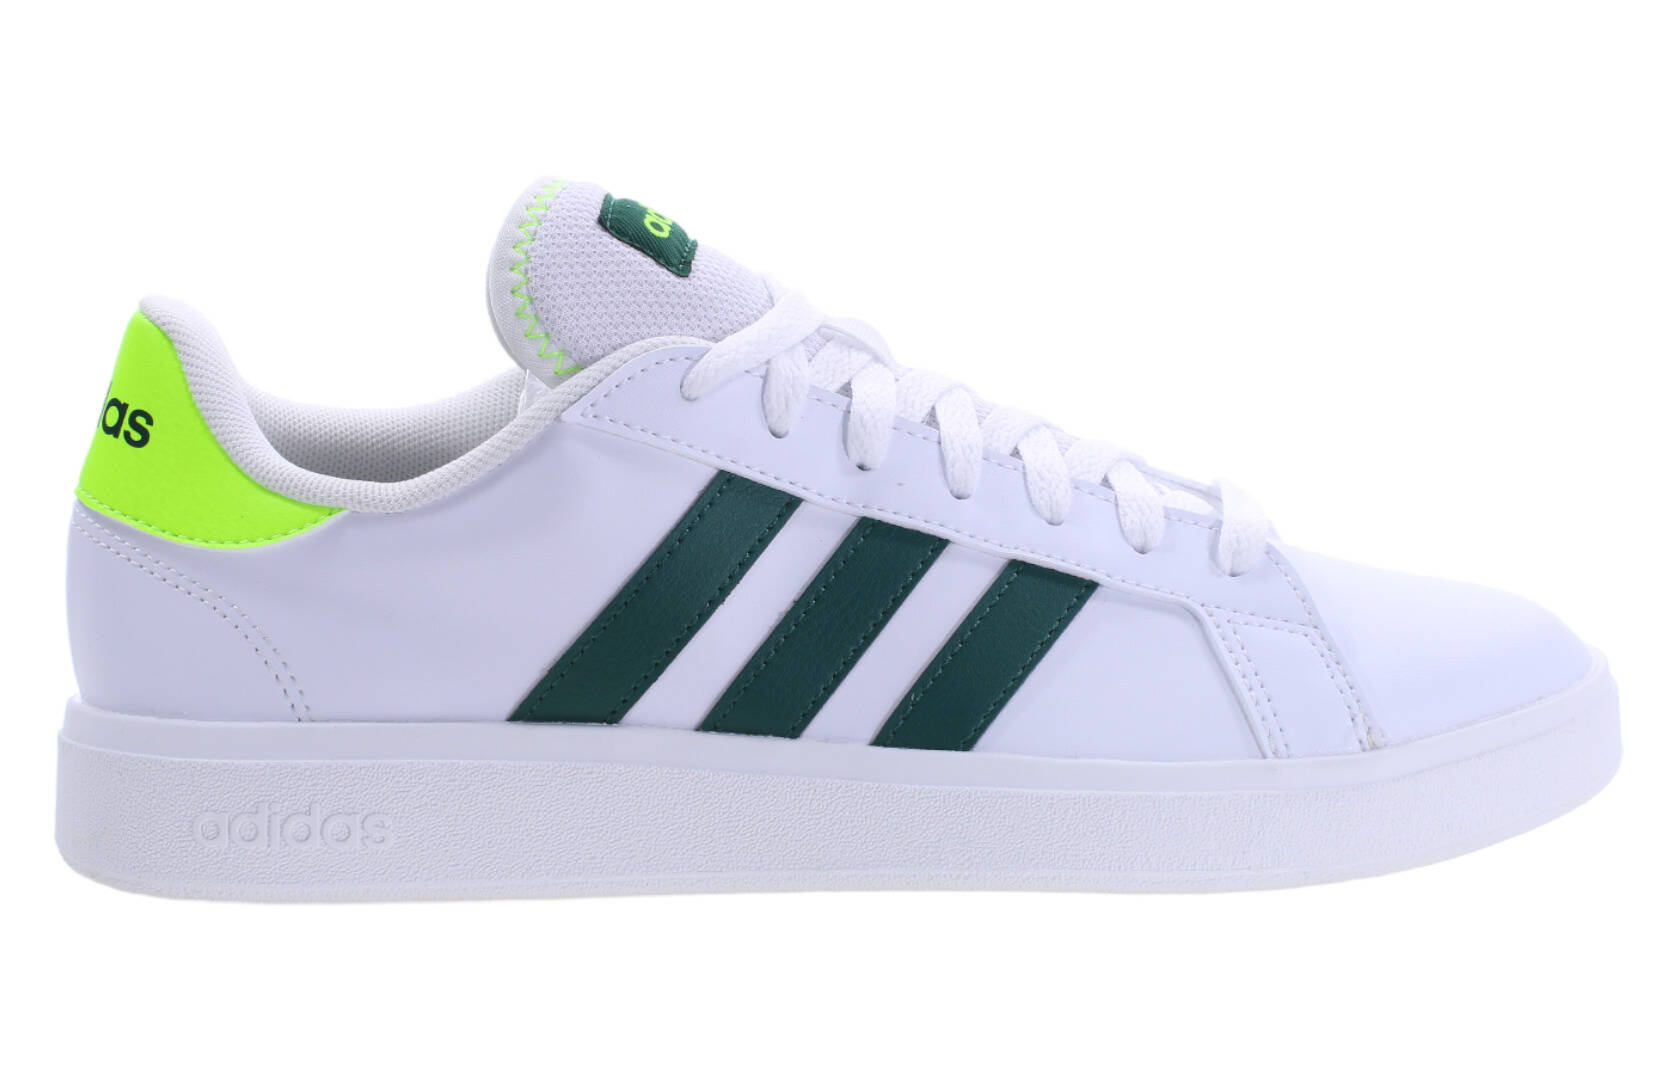 adidas GRAND COURT BASE 2 men's shoes. ID4450